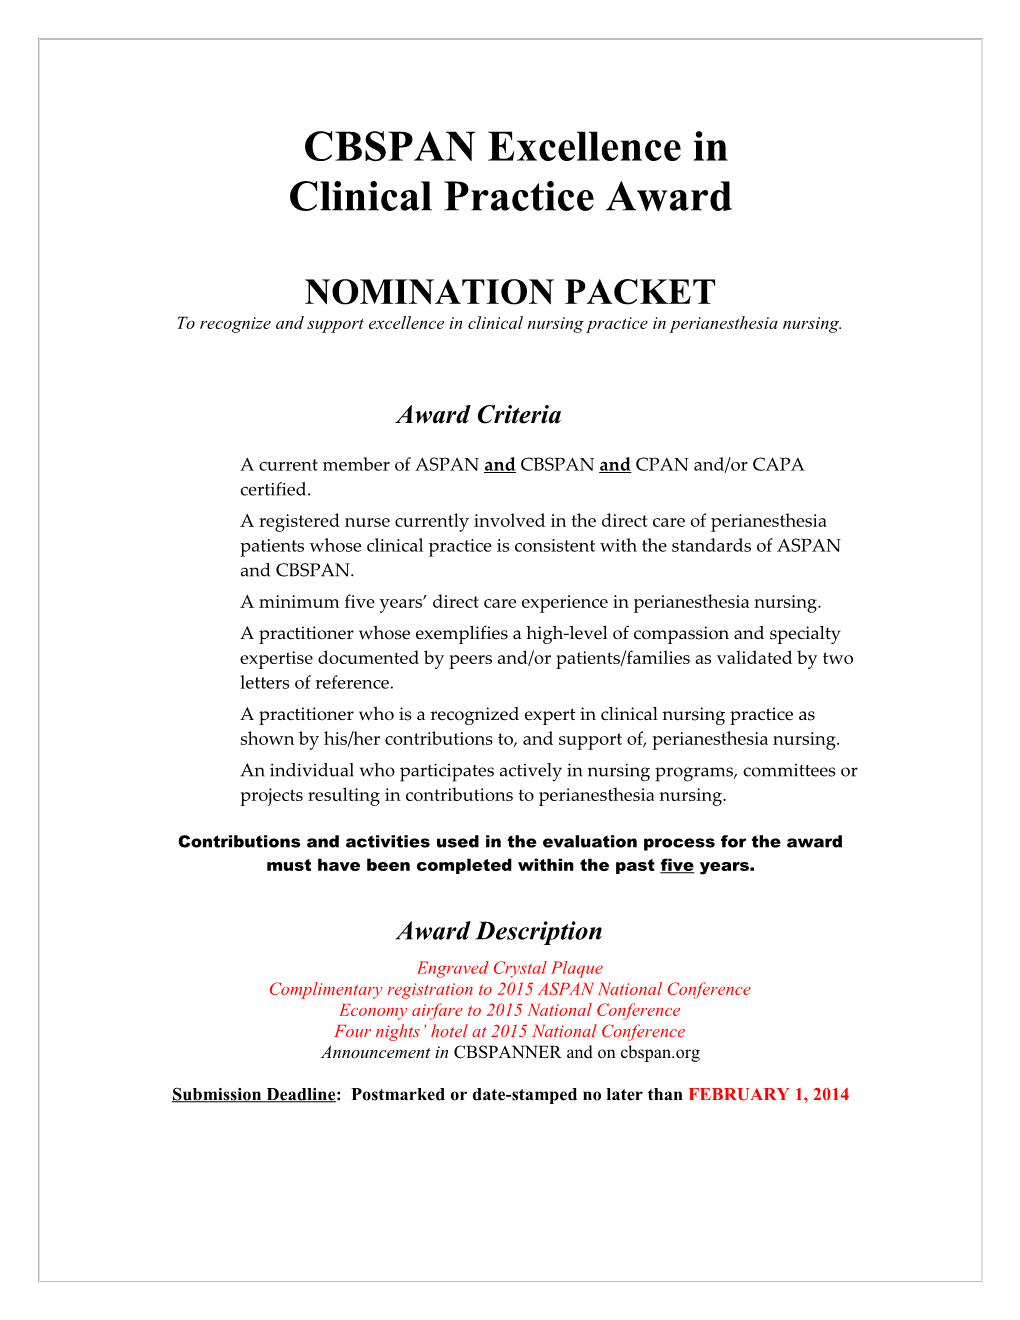 Excellence in Clinical Practice Award